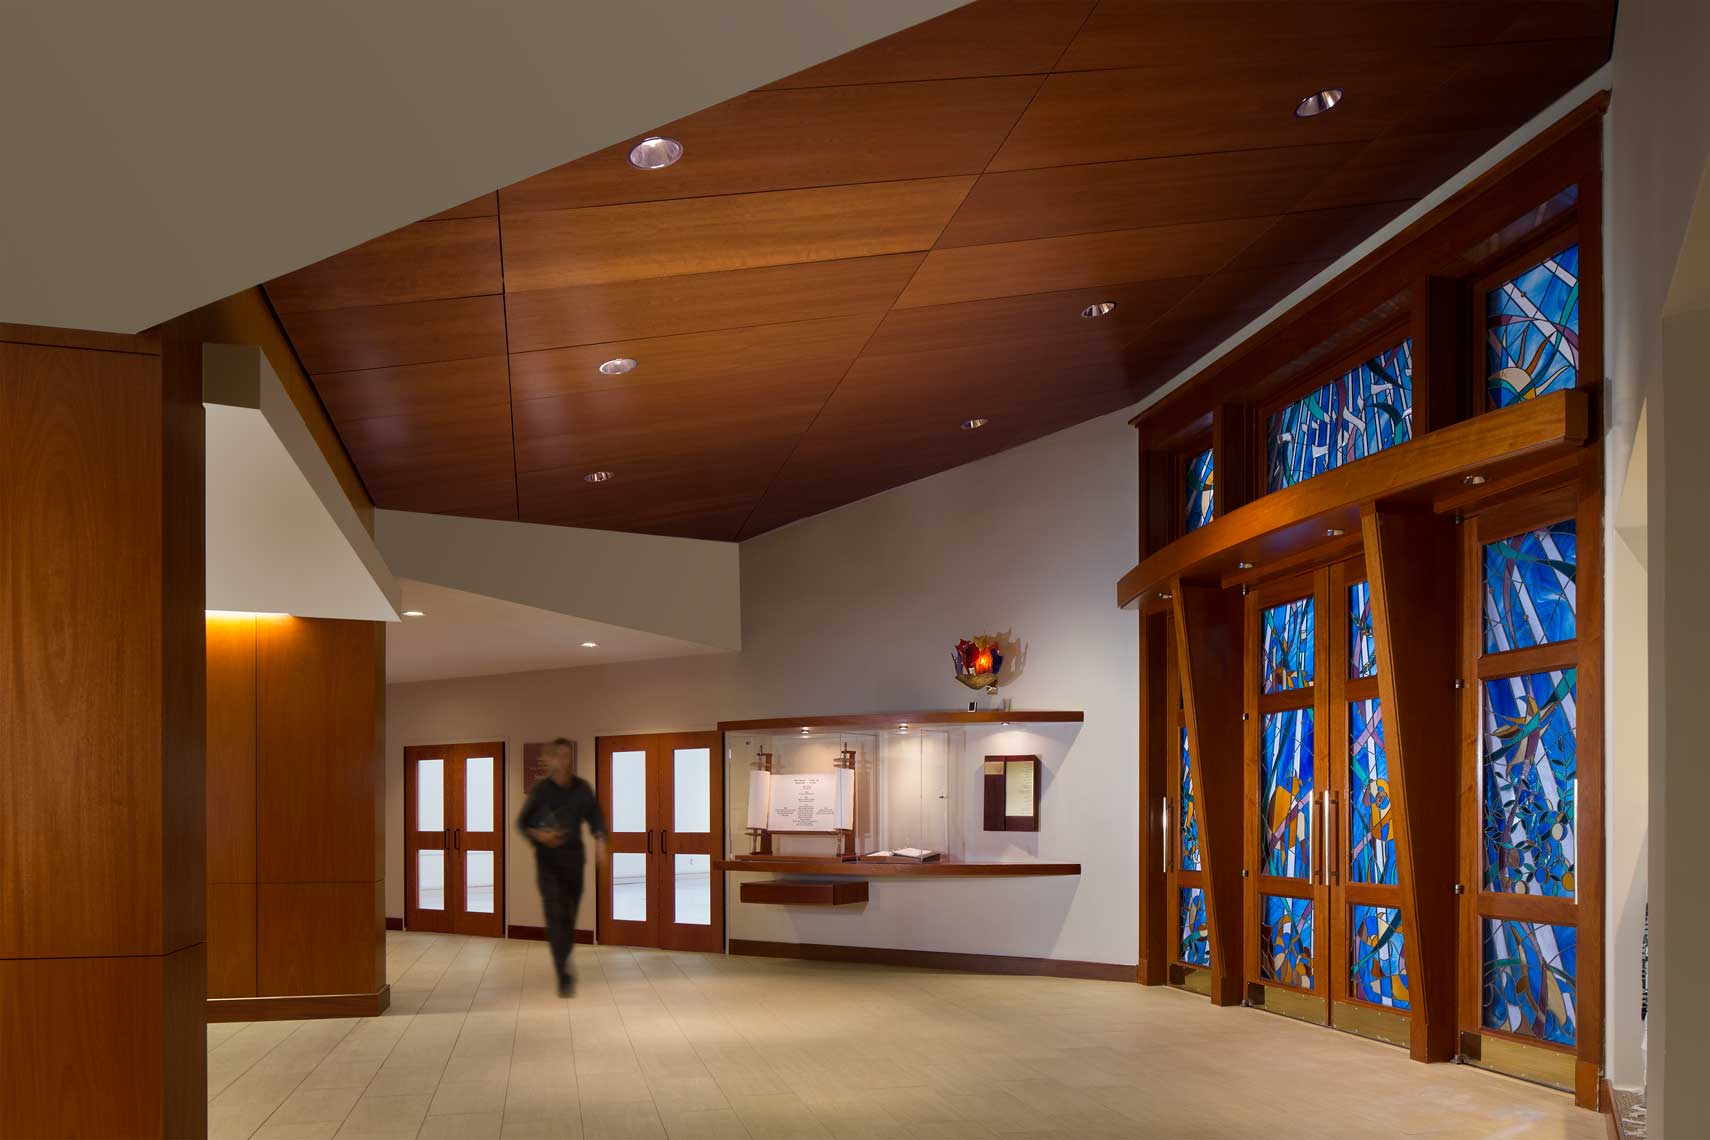 A view highlighting the materials used around the entrance to the sanctuary of Congregation Etz Chaim